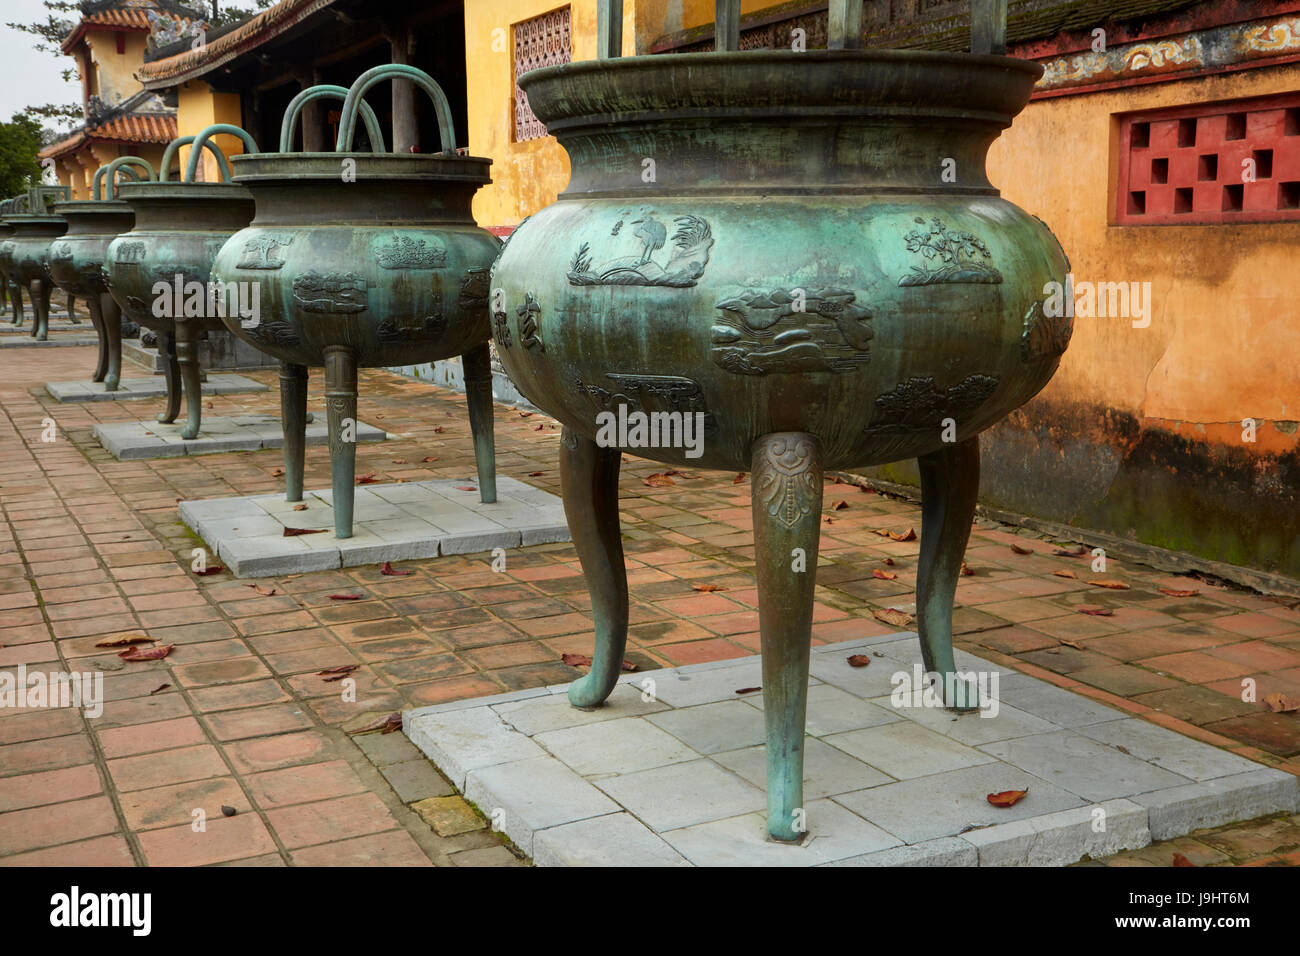 Some of the Nine Dynastic Urns (1835/36), historic Hue Citadel (Imperial City), Hue, North Central Coast, Vietnam Stock Photo